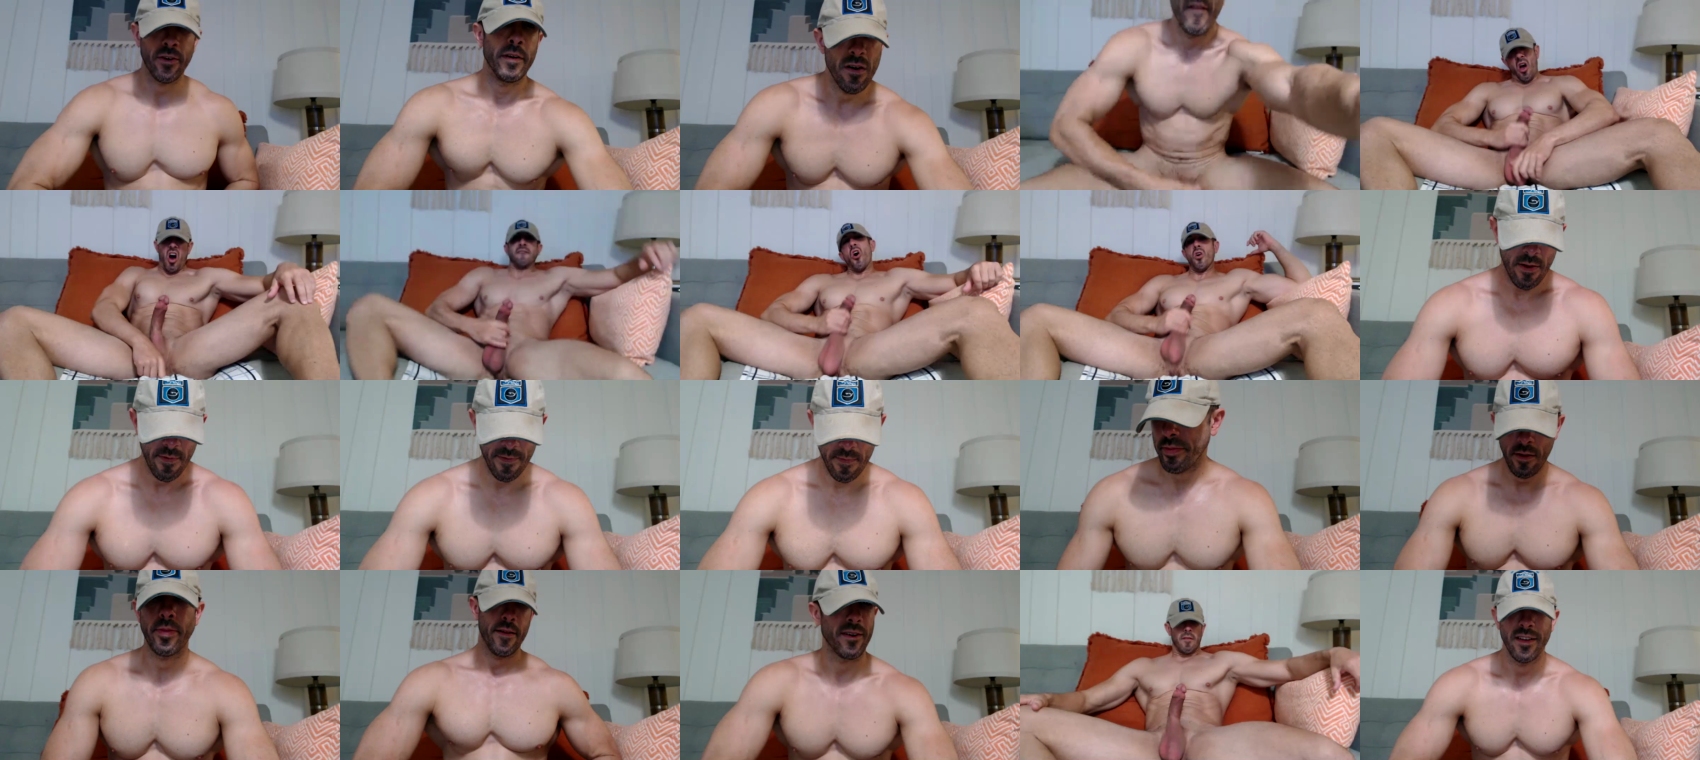 nerdmuscles2x  01-10-2022 Males Naked